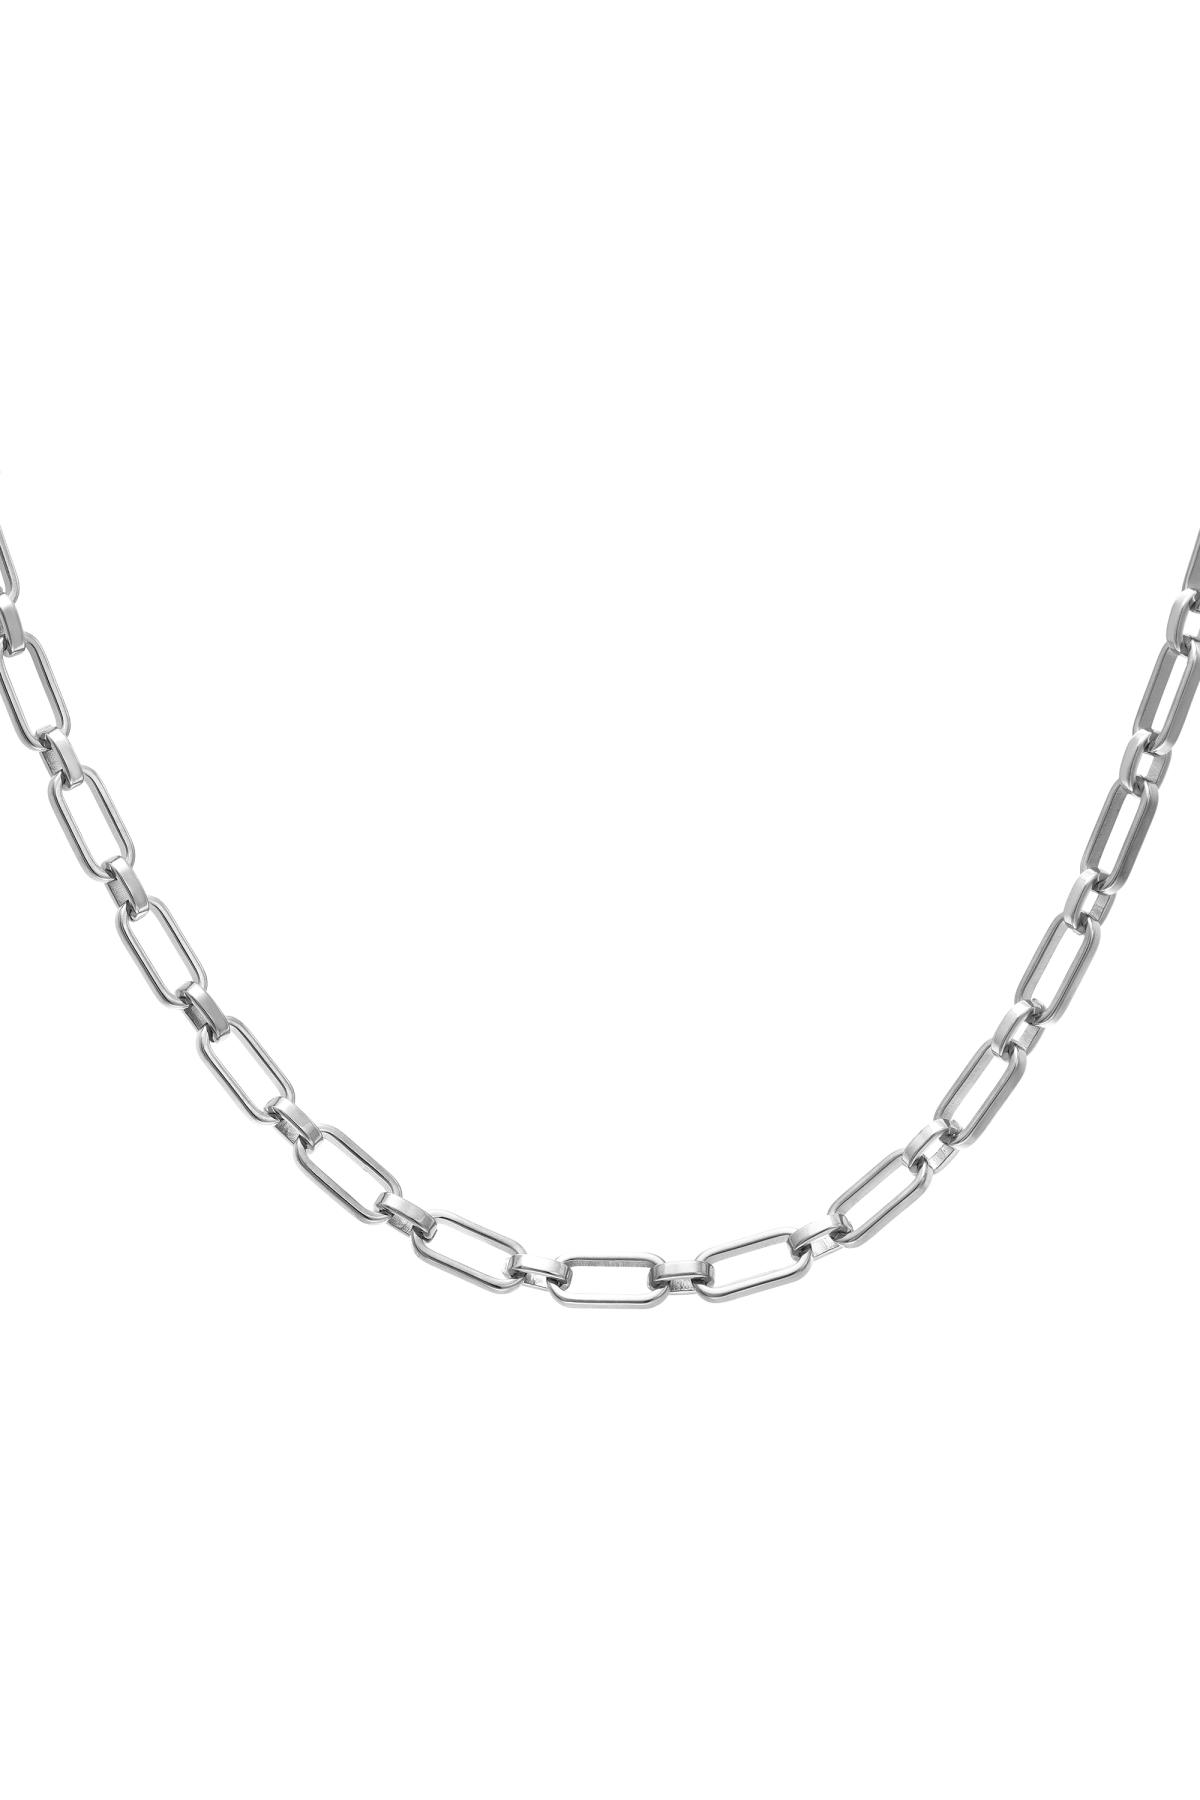 Statement ketting roestvrij staal Zilver Stainless Steel